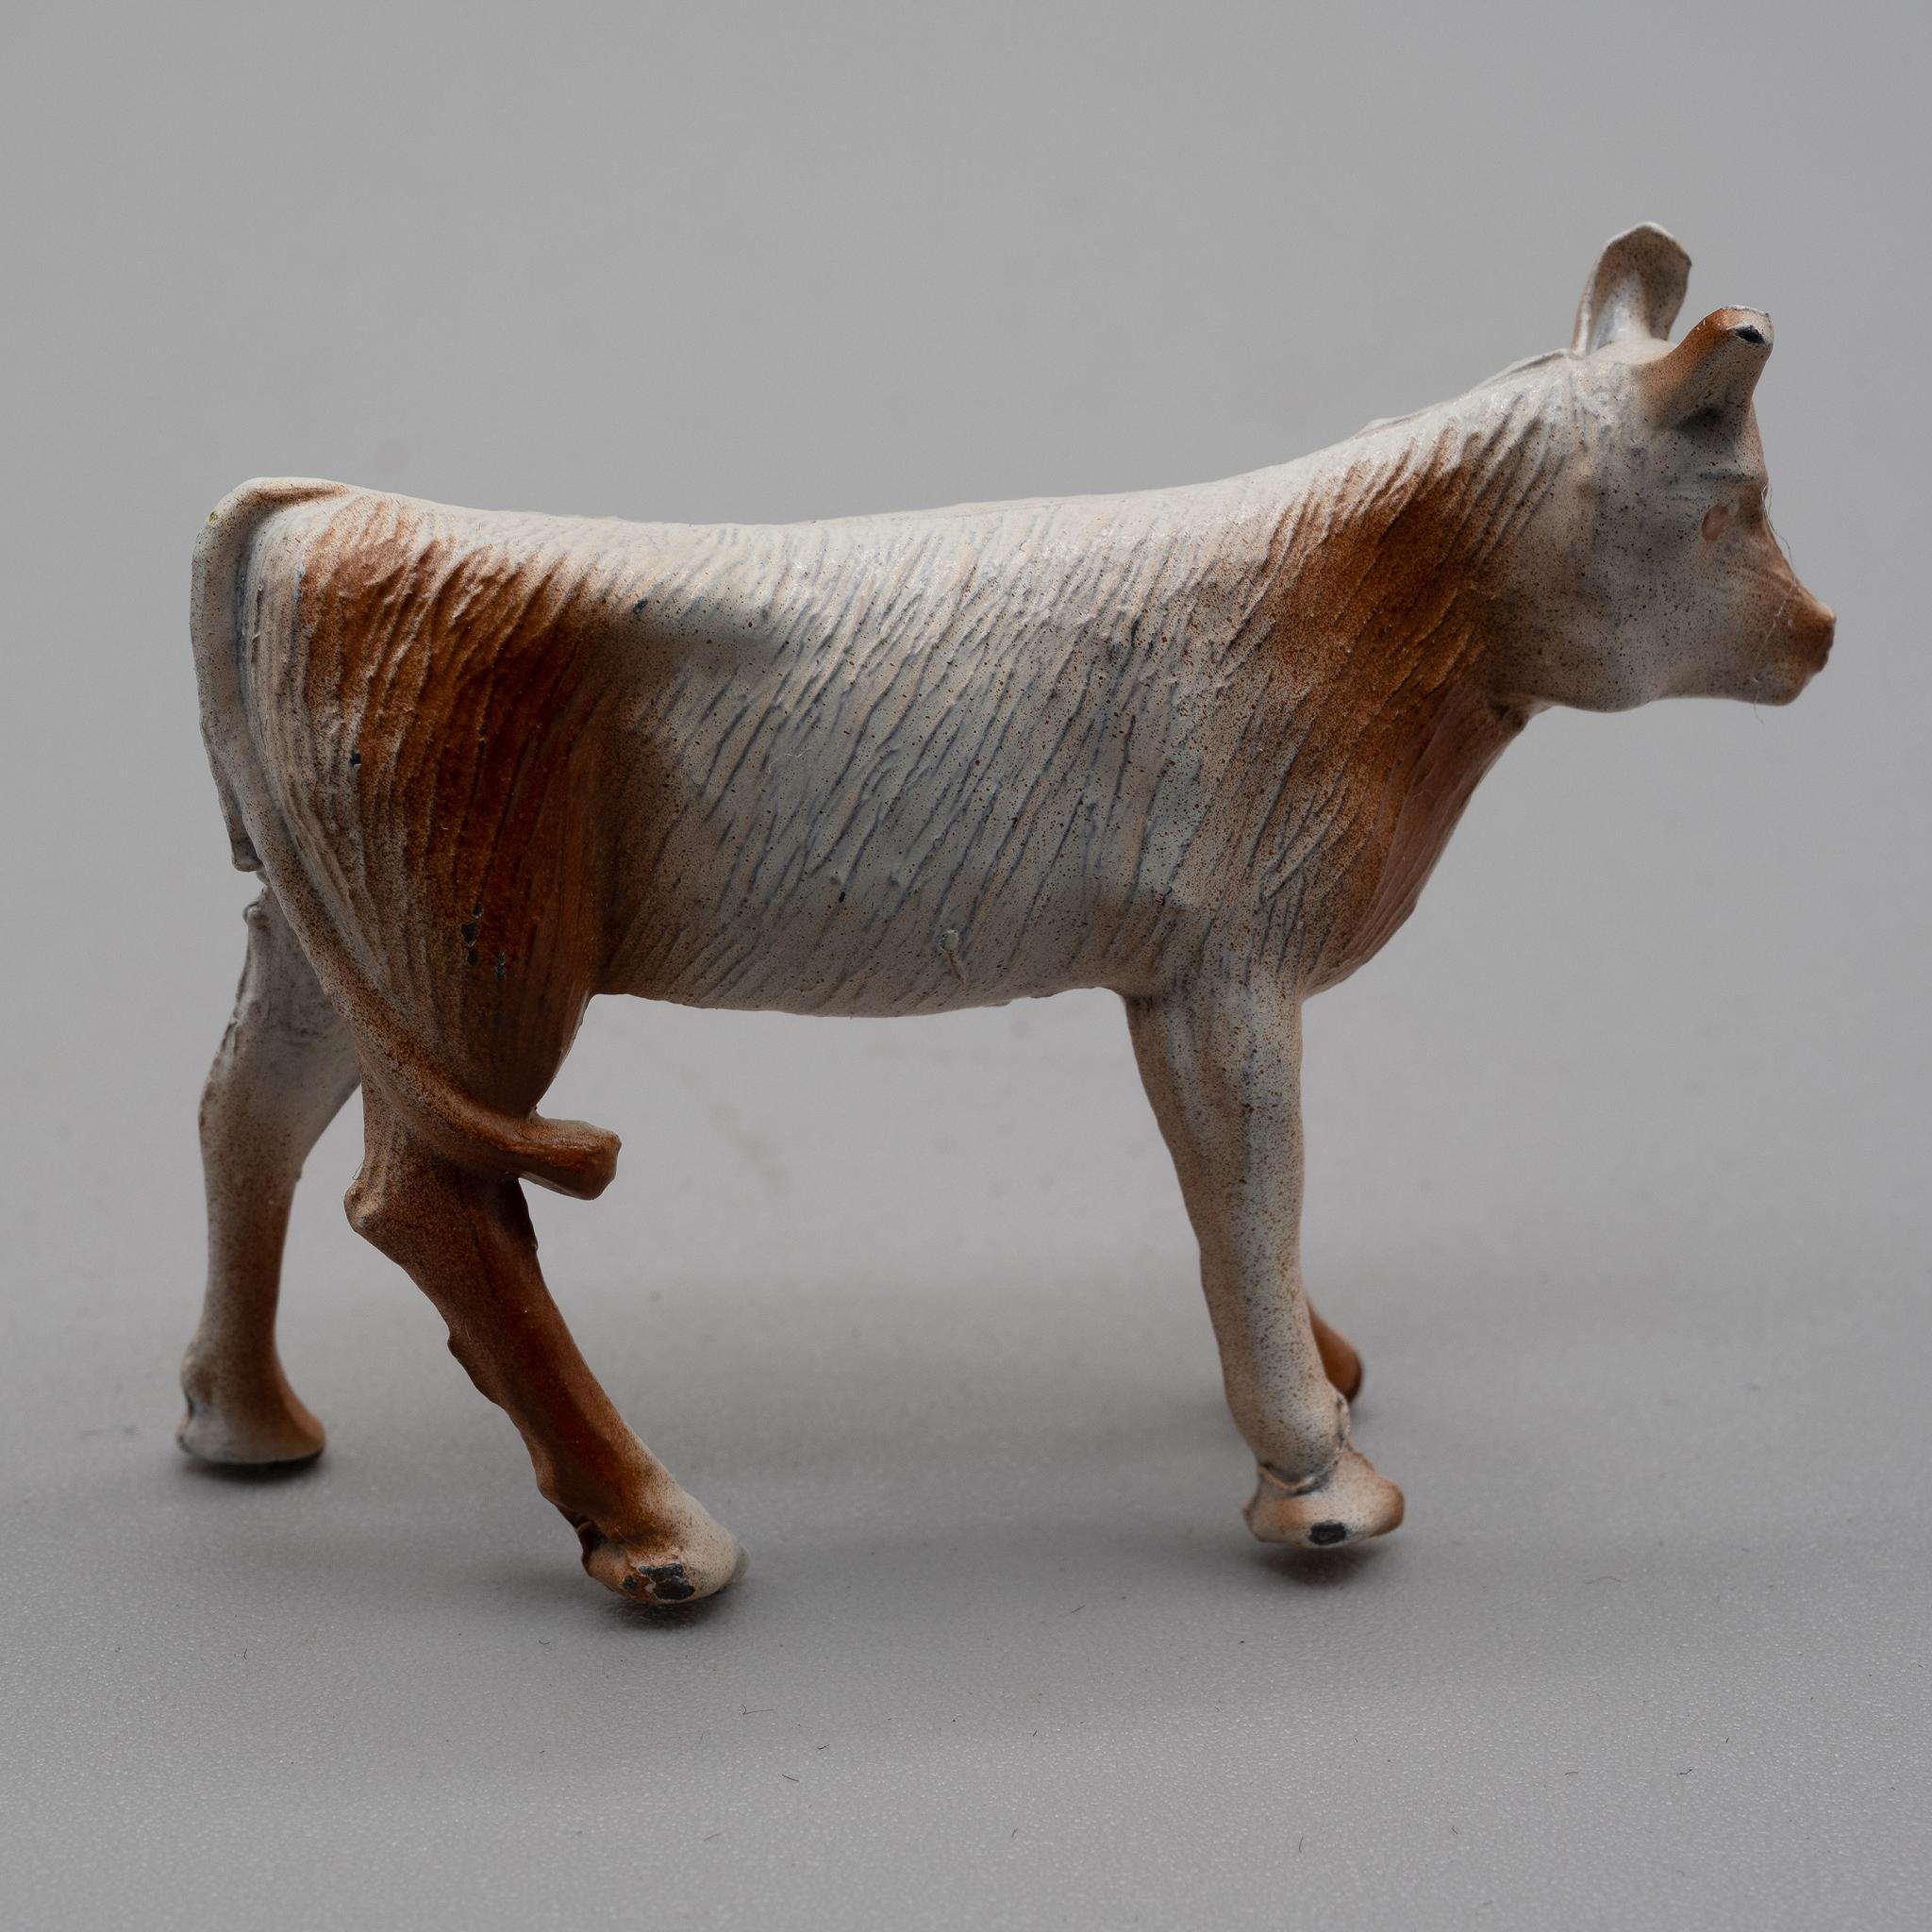 Lead+Calf+Farm+Animal+Toy+by+Crescent+England picture 1